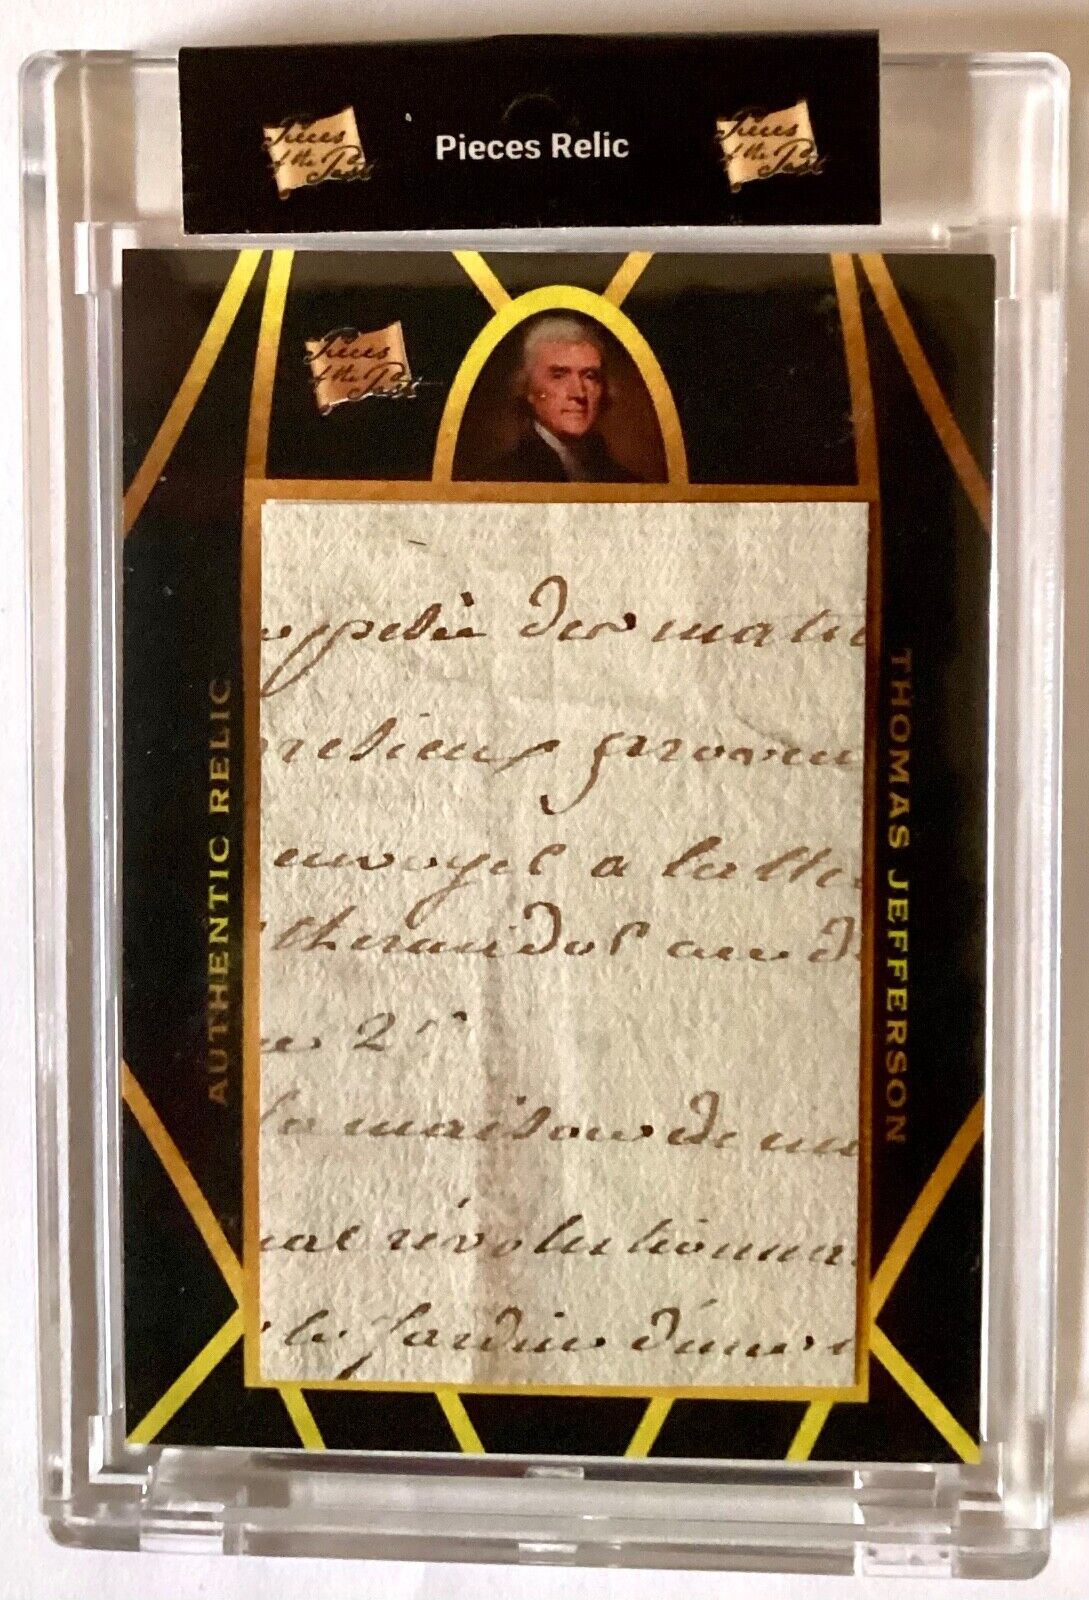 THOMAS JEFFERSON HANDWRITING RELIC - “Revolution” in French - Pieces the Past